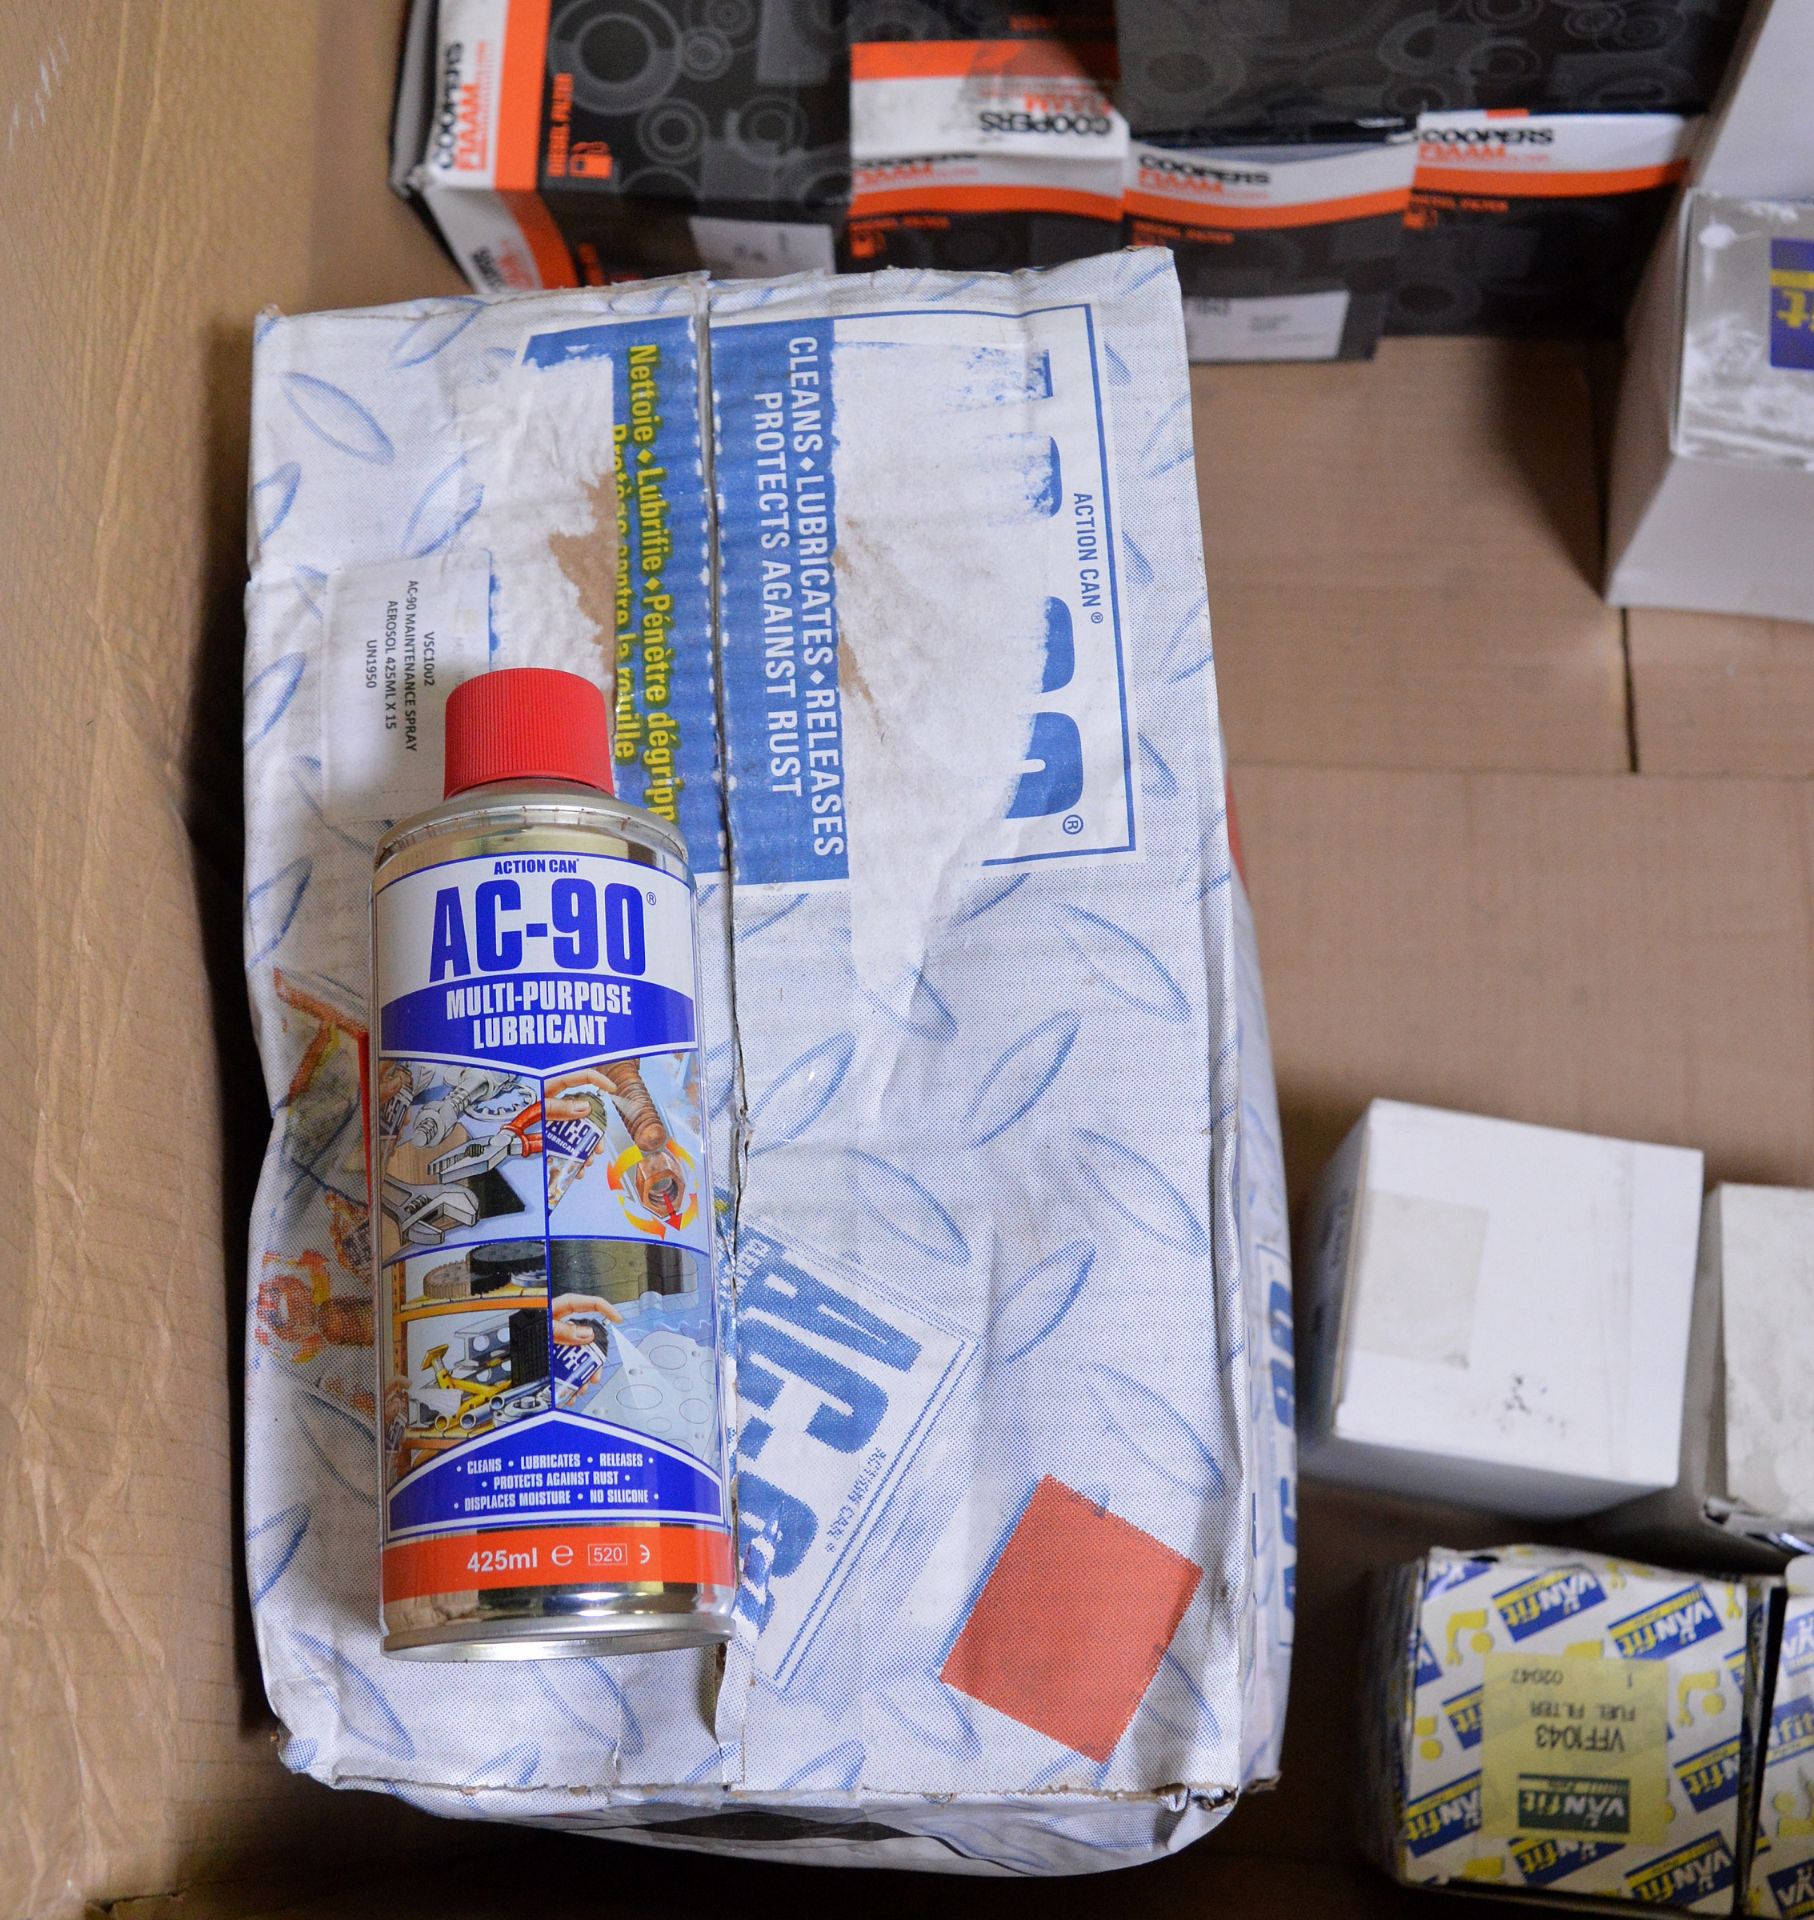 Vehicle parts - AC-90 multipurpose lubricant, fuel filters - see picture for itinerary for - Image 4 of 6